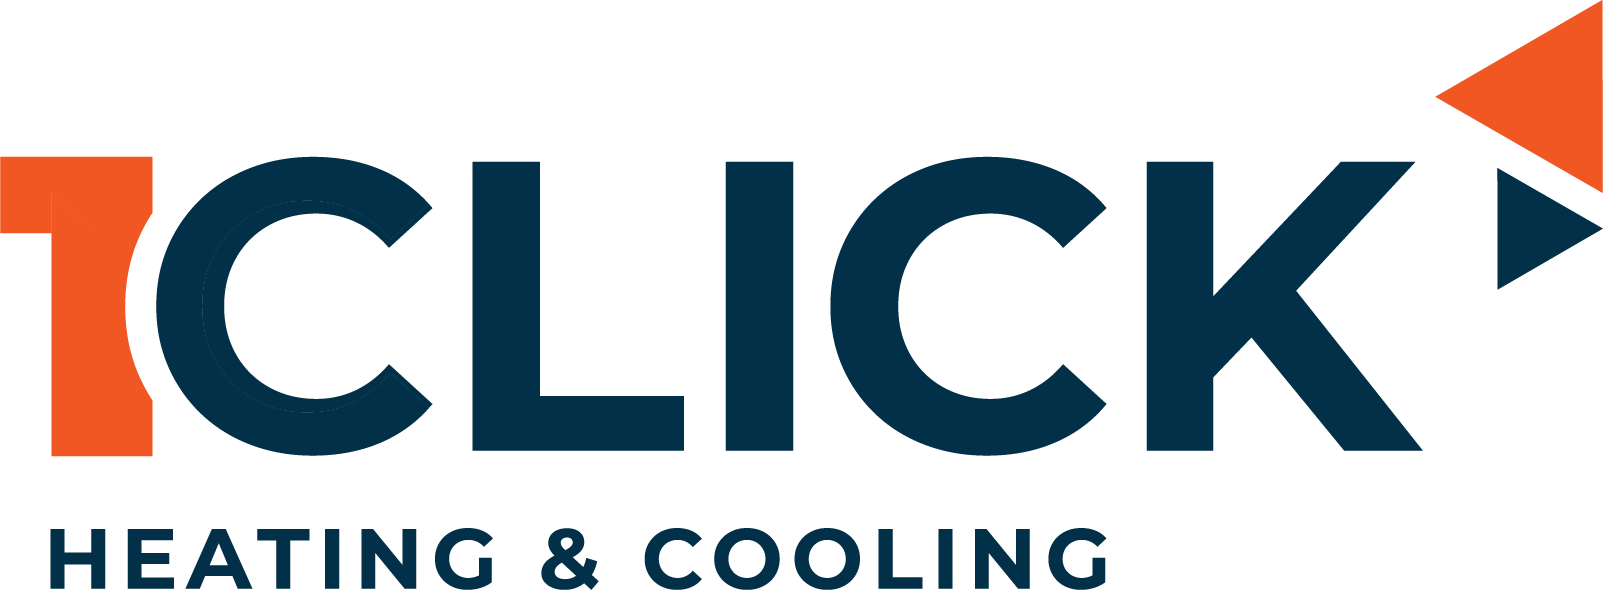 1Click Heating & Cooling Logo